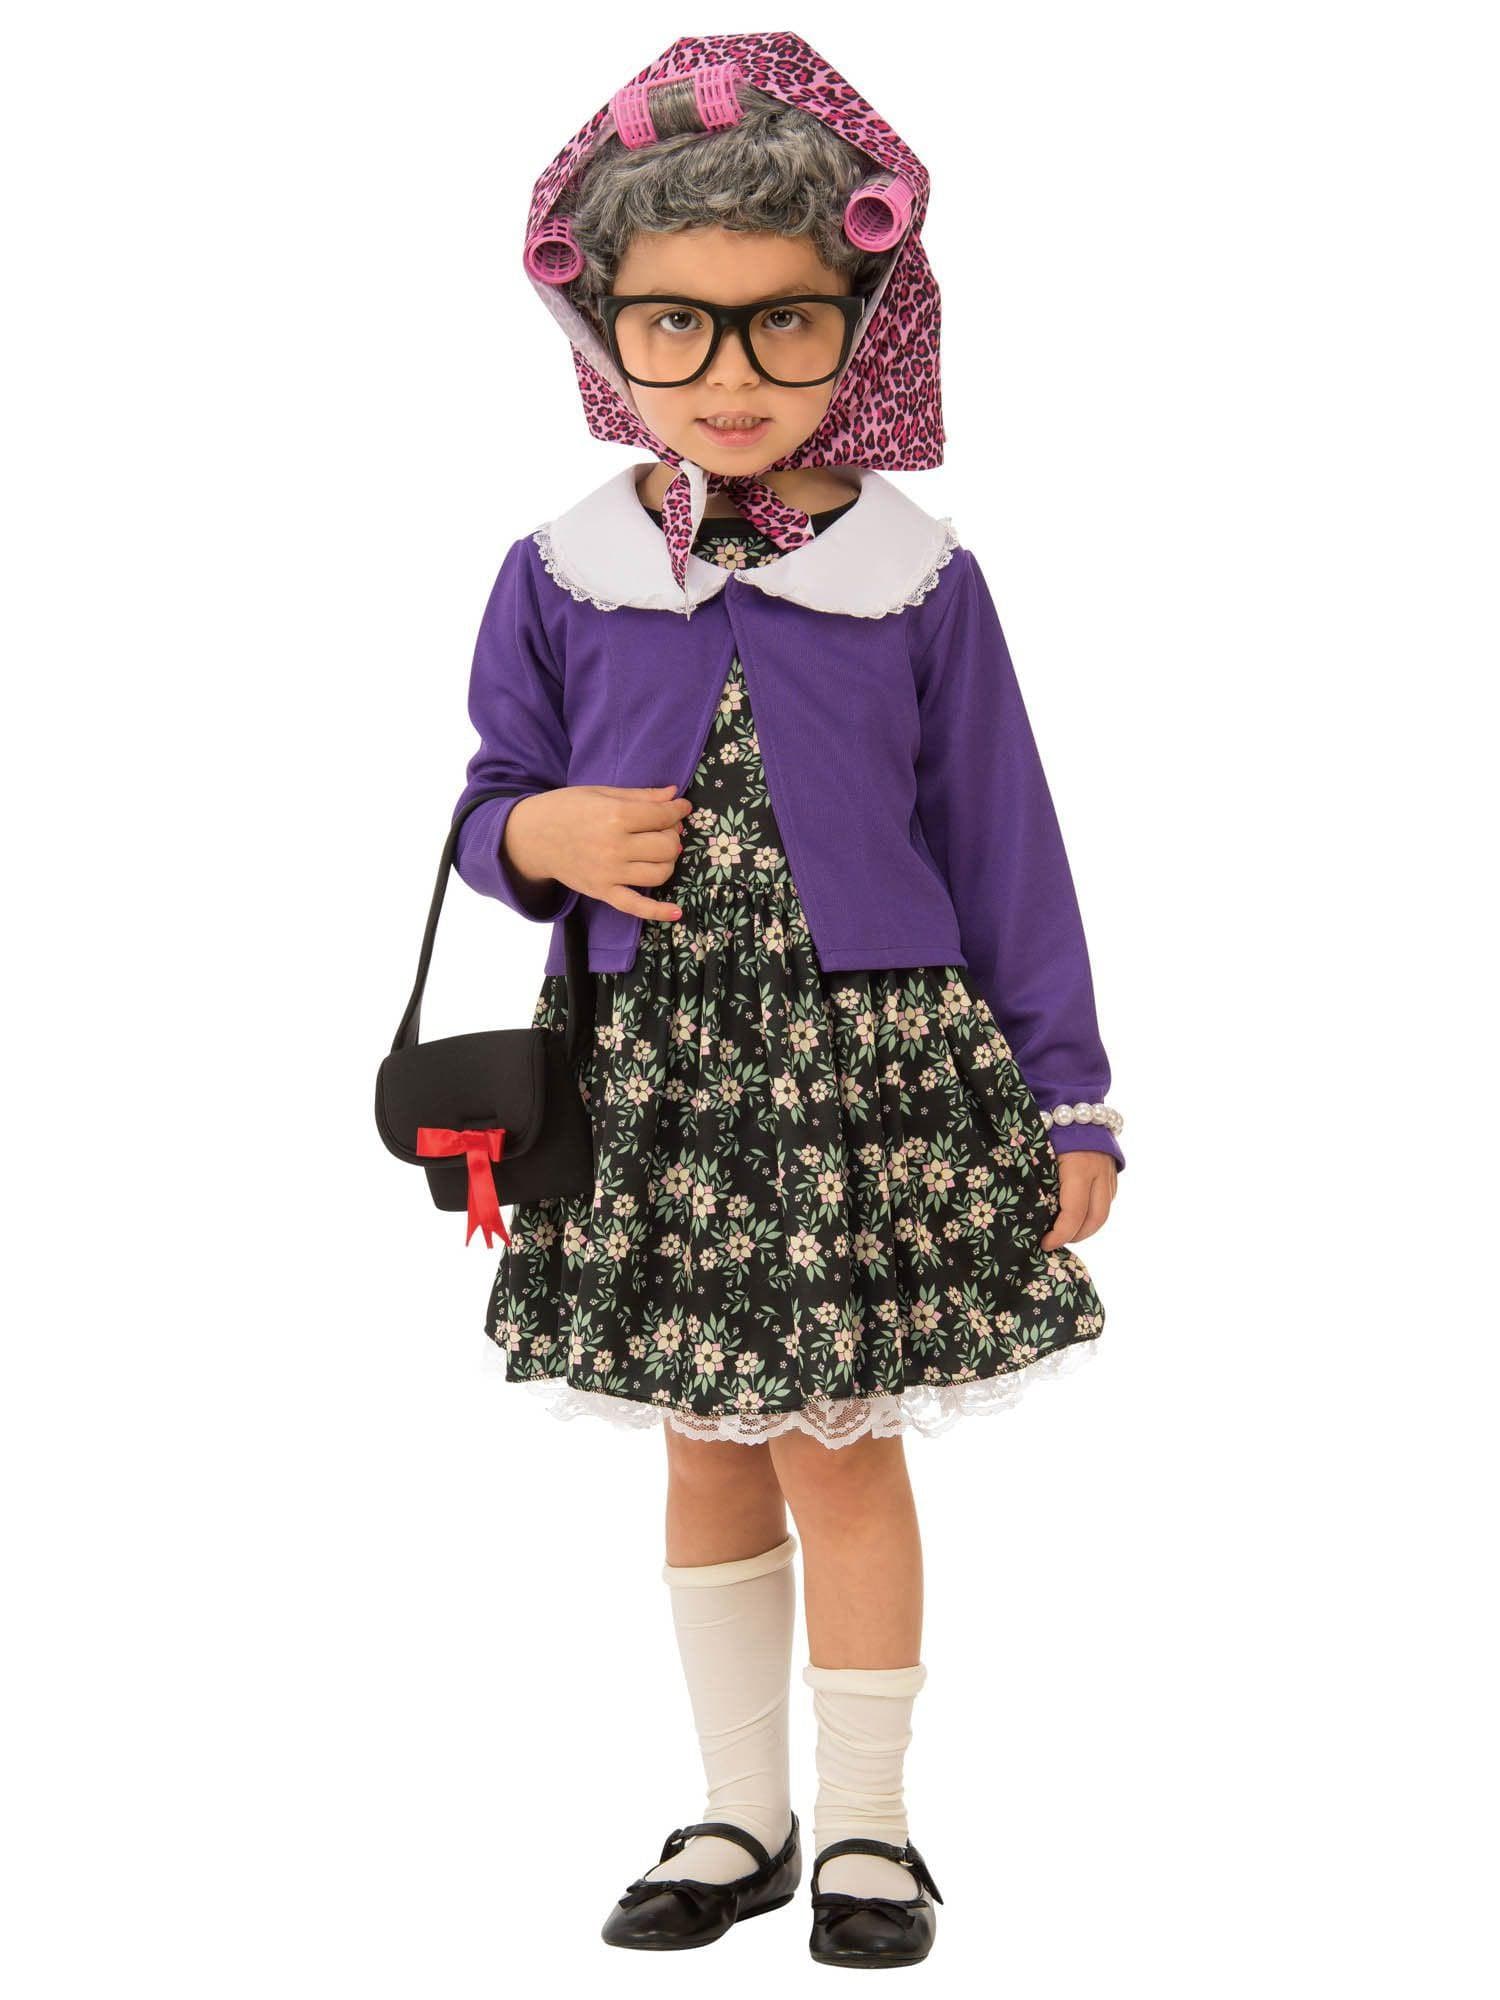 Kids Little Old Lady Costume - costumes.com